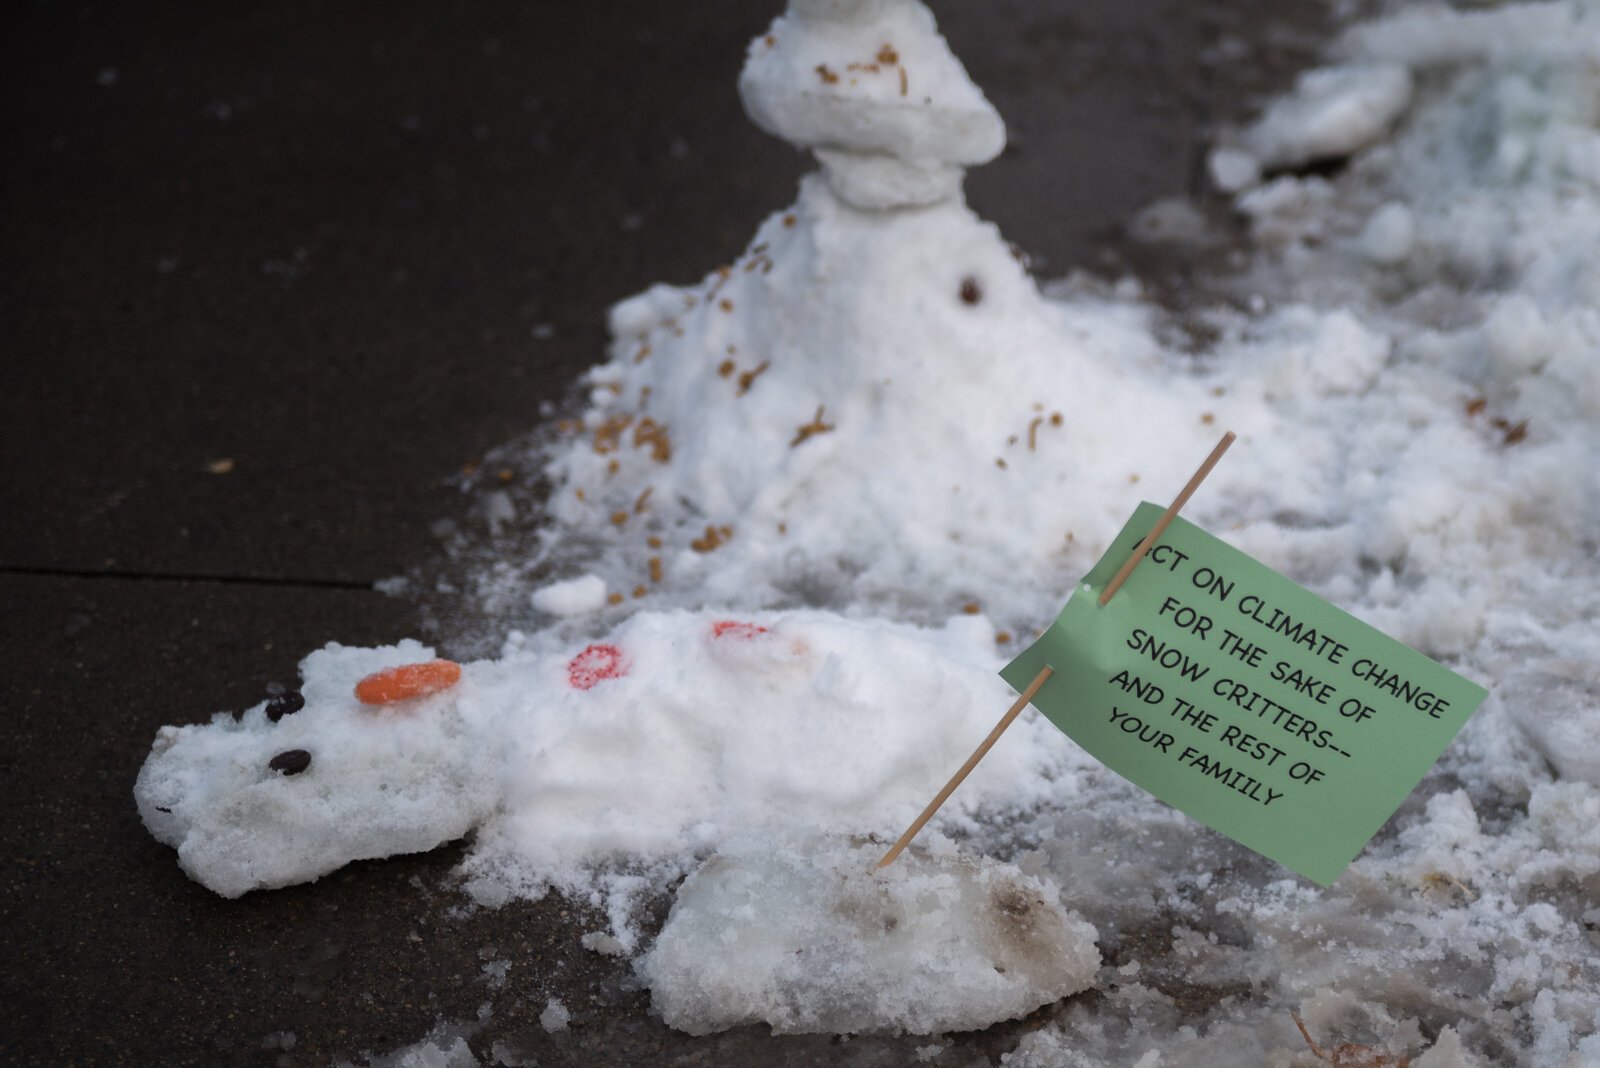 Activists used signs to convey various messages on the urgency of climate action to the public.